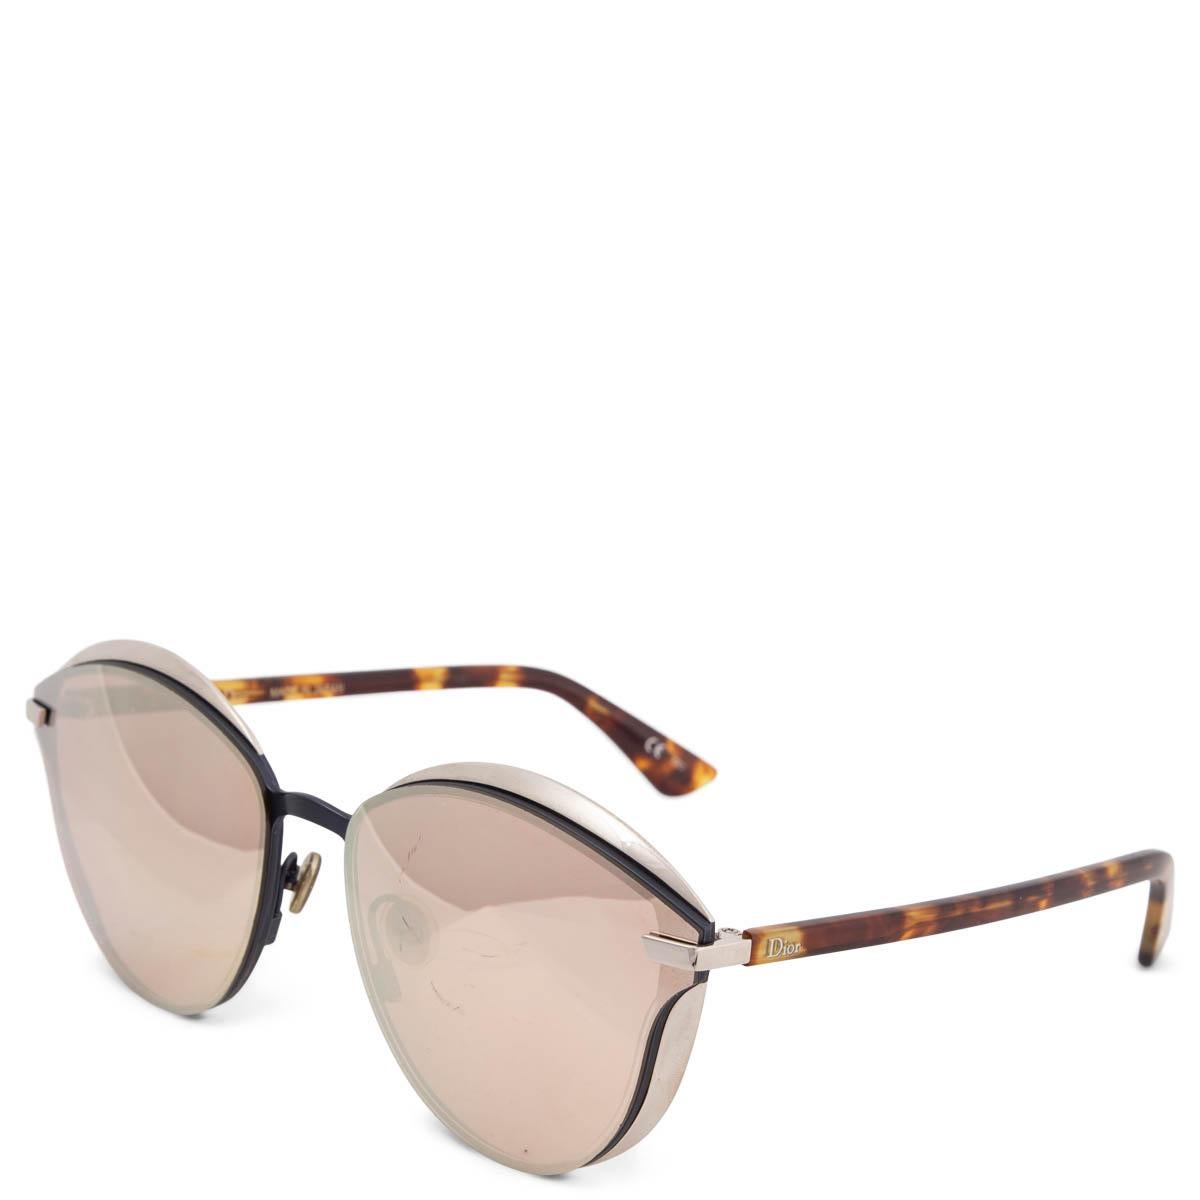 100% authentic Christian Dior Murmure Edition Limitée sunglasses with grey mirrored lenses, brown tortoise temples and a light gold-tone metal frame. Have been worn and show some scratches on the left lens. Overall in very good condition. Comes with